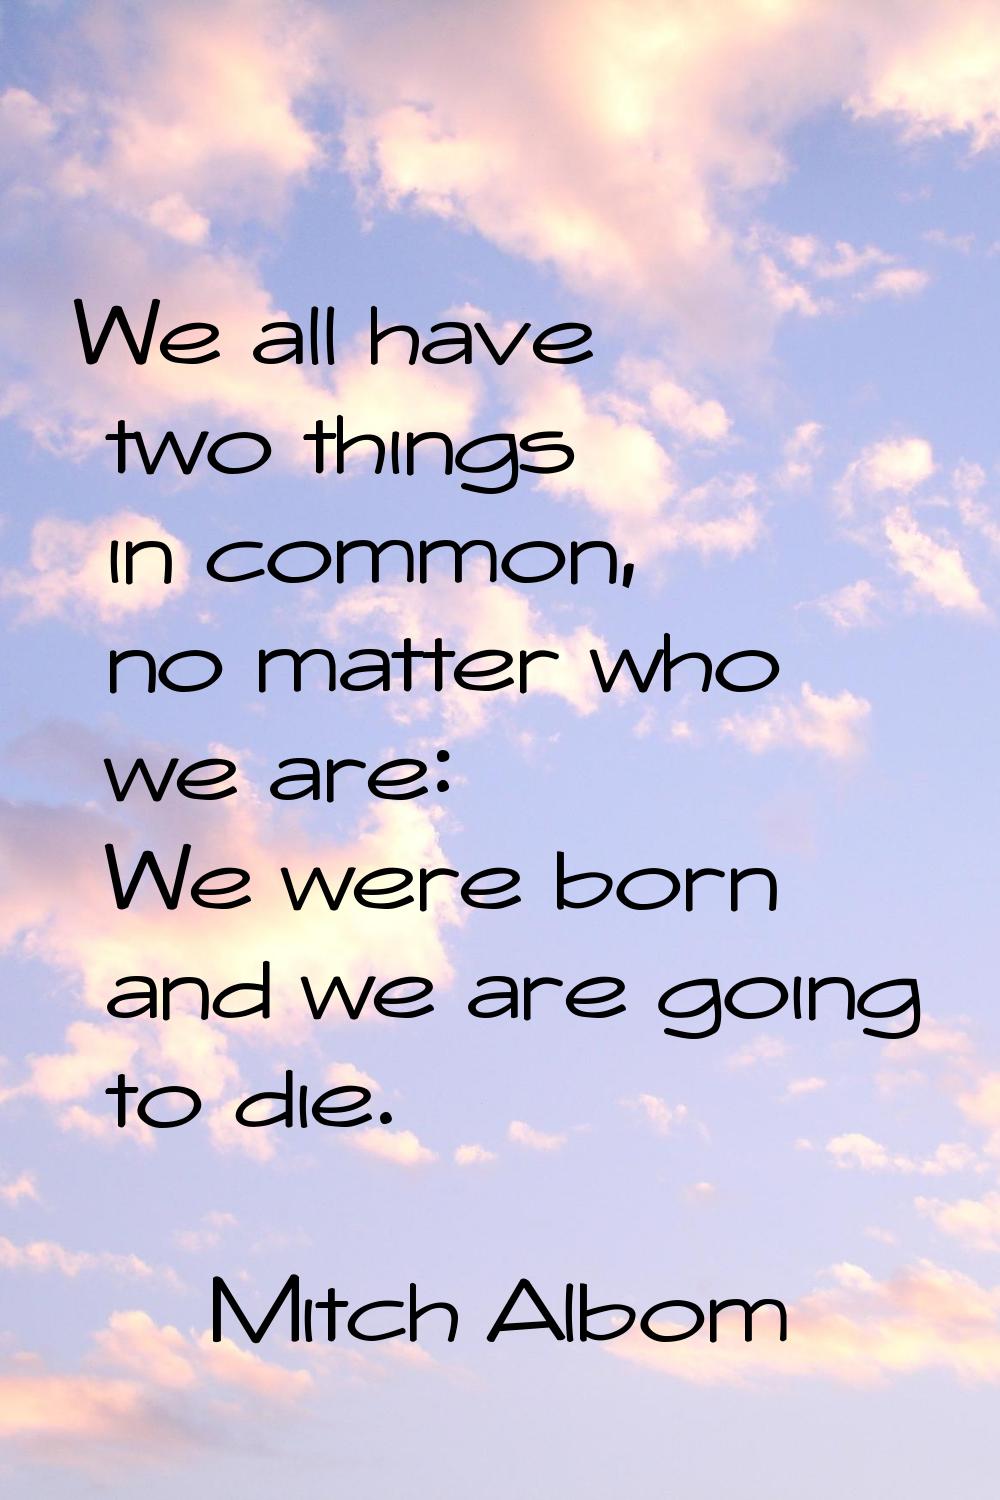 We all have two things in common, no matter who we are: We were born and we are going to die.